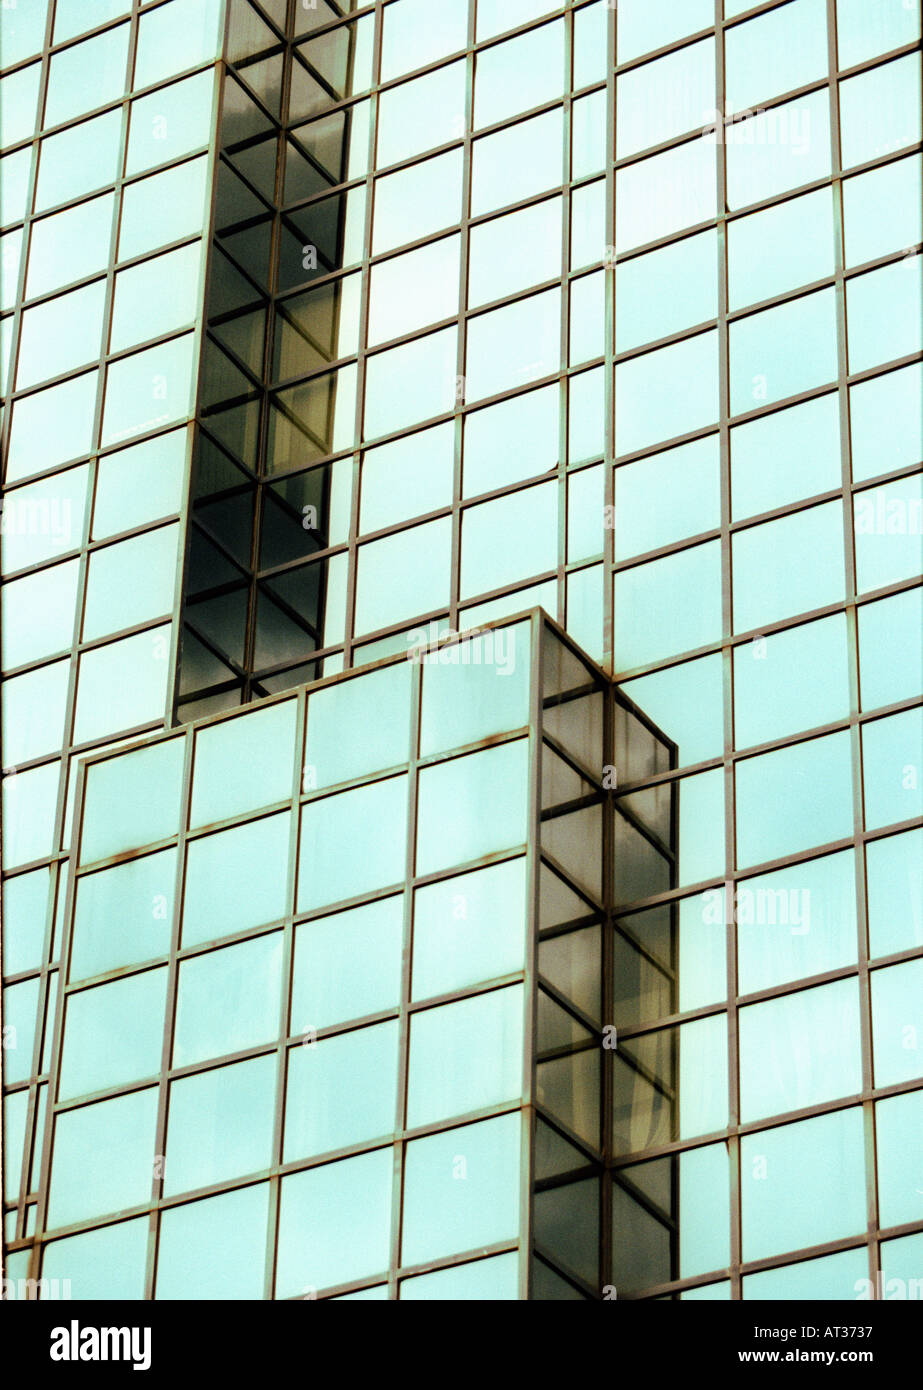 Mirrored facade of Office Building Stock Photo